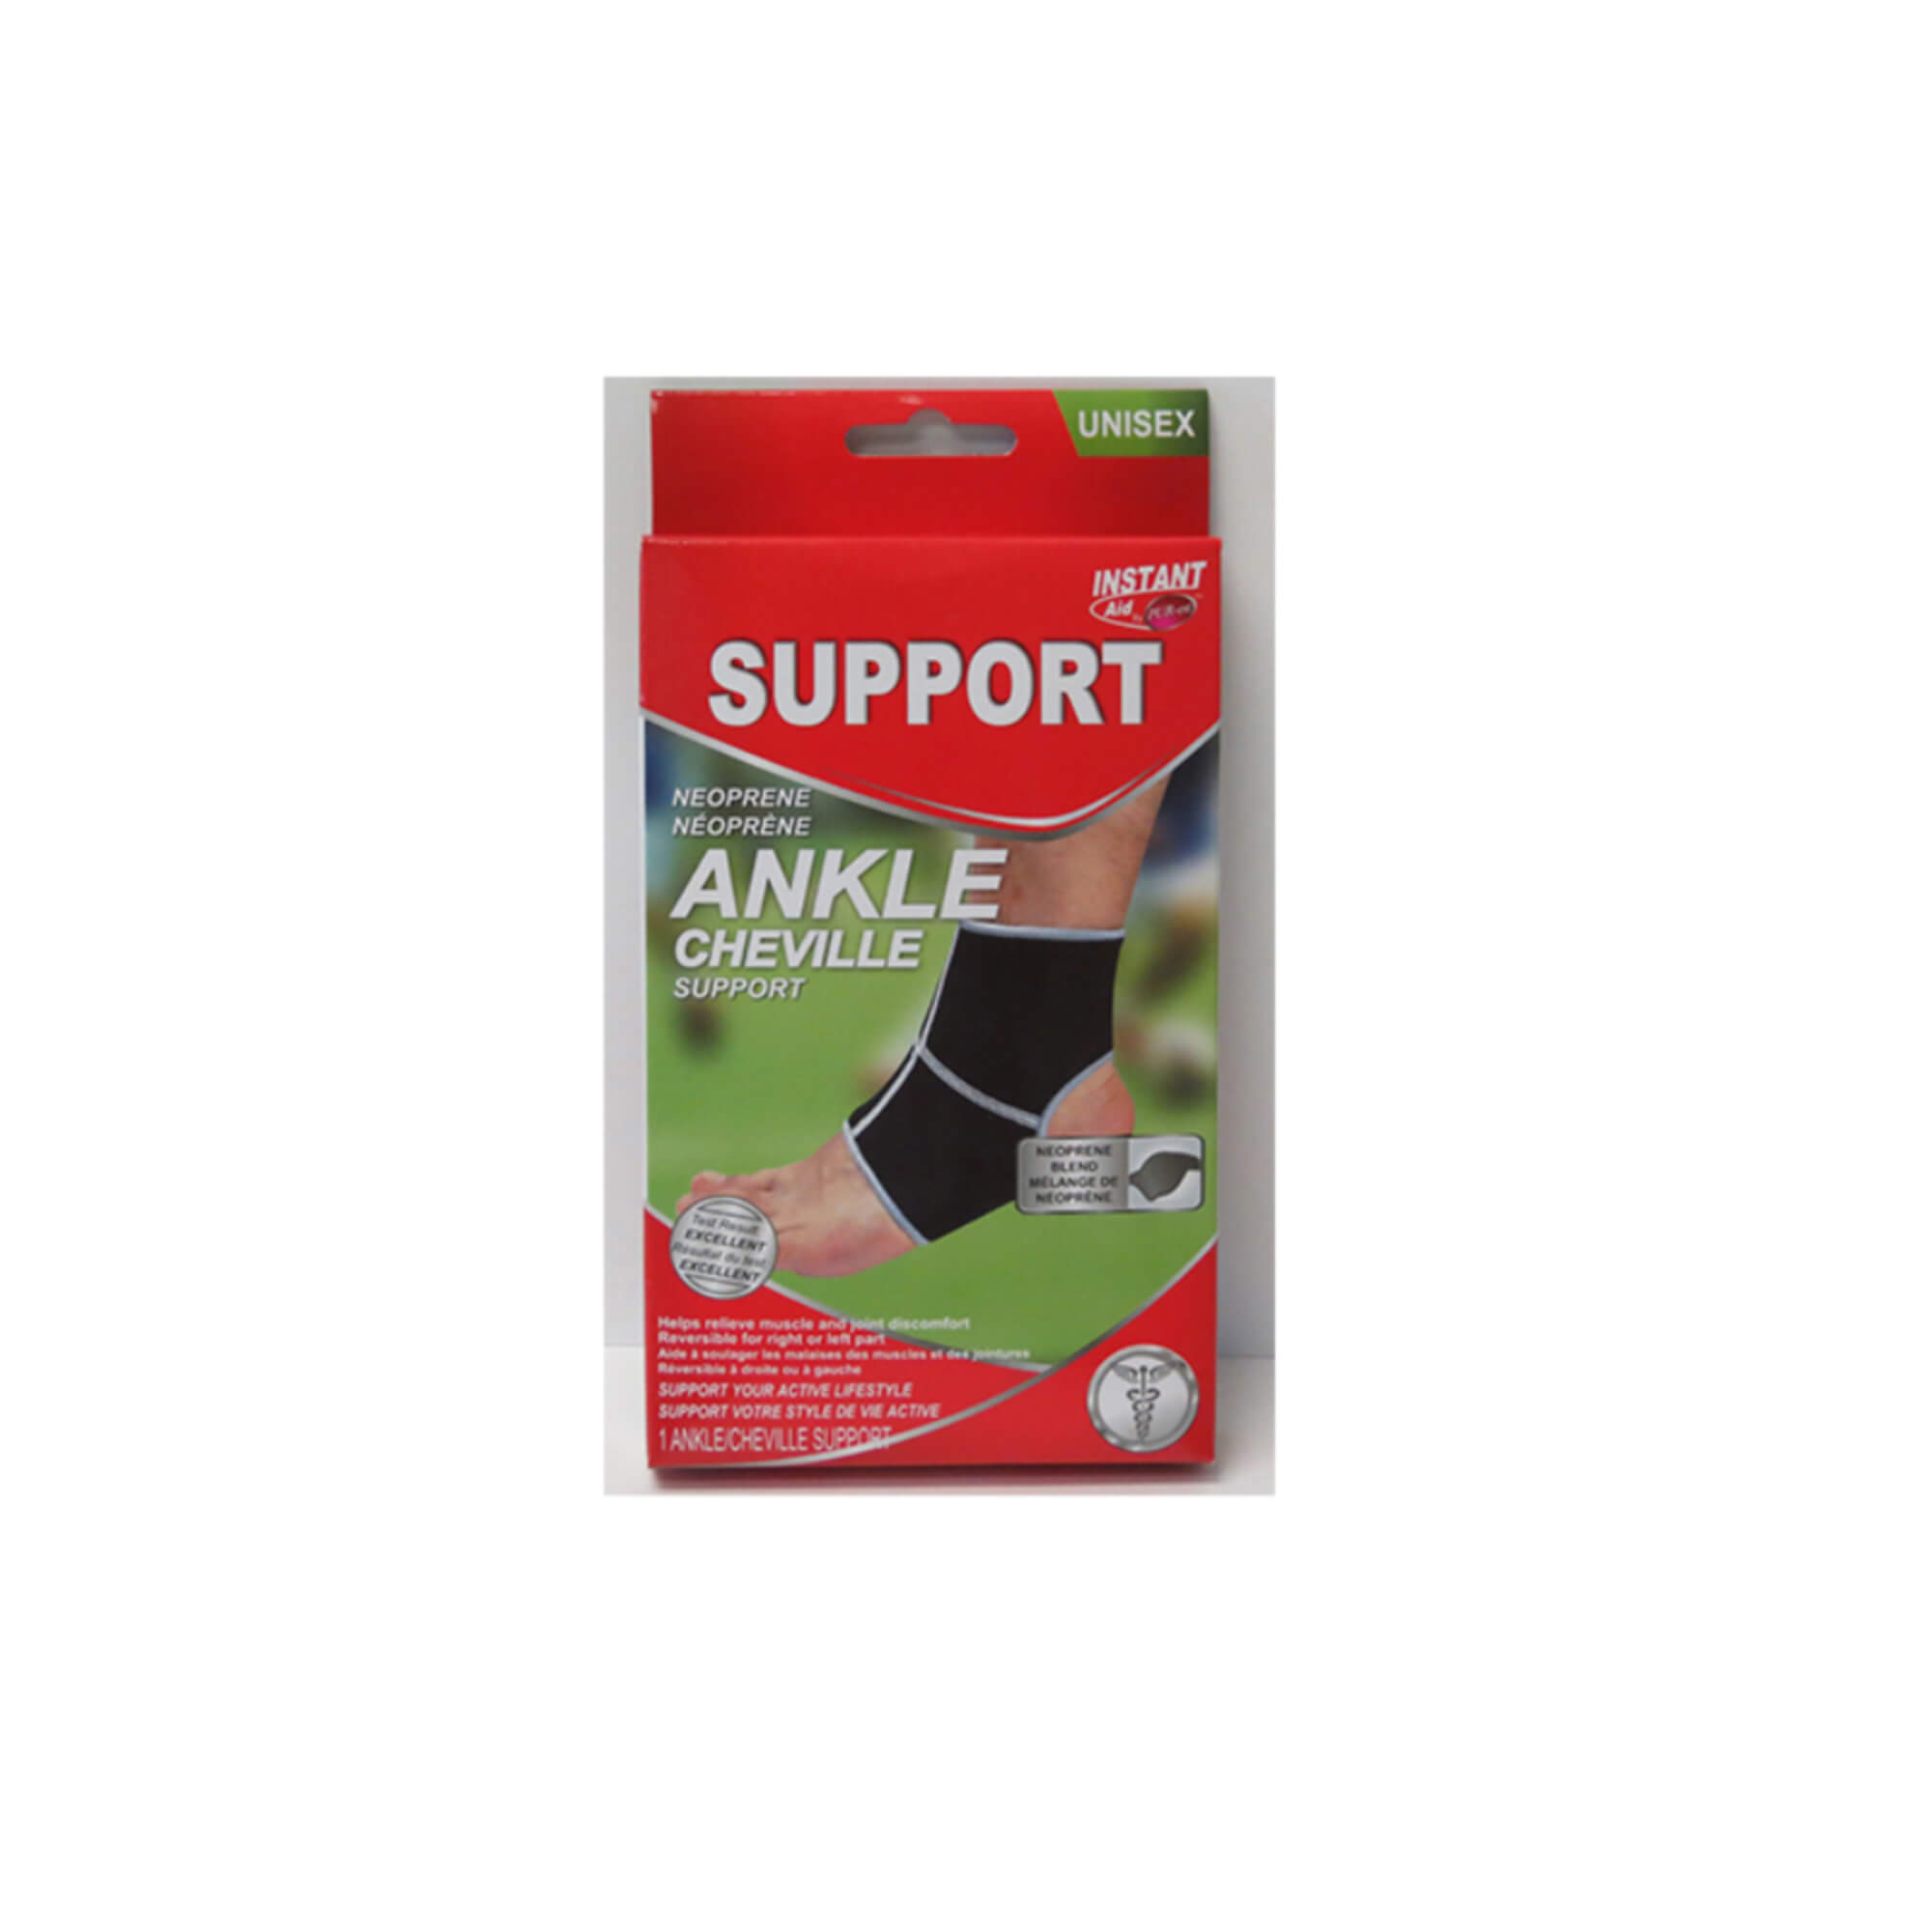 Purest Instant Aid Ankle Support - Pack of 6